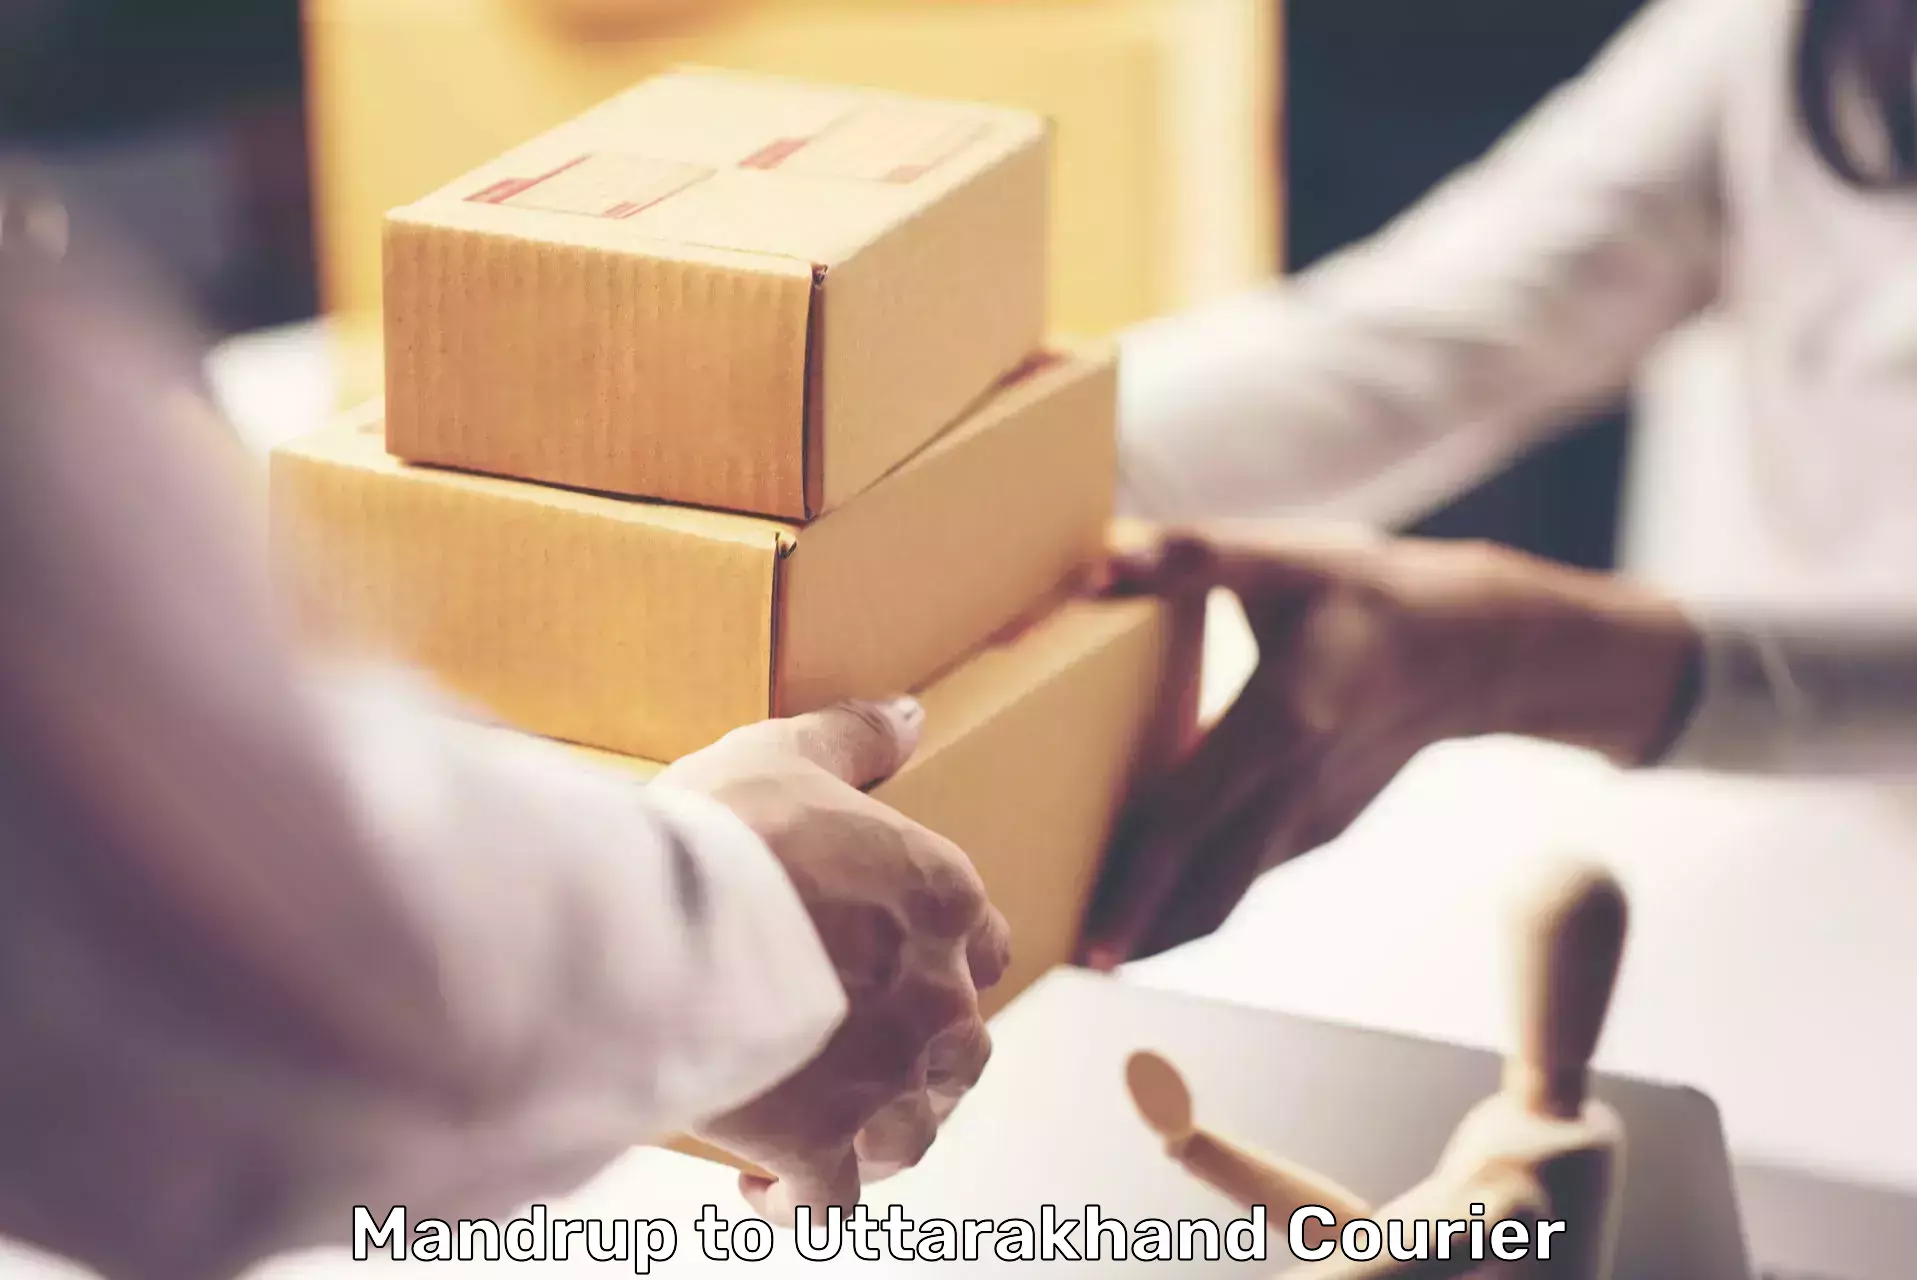 Global courier networks Mandrup to Nainital